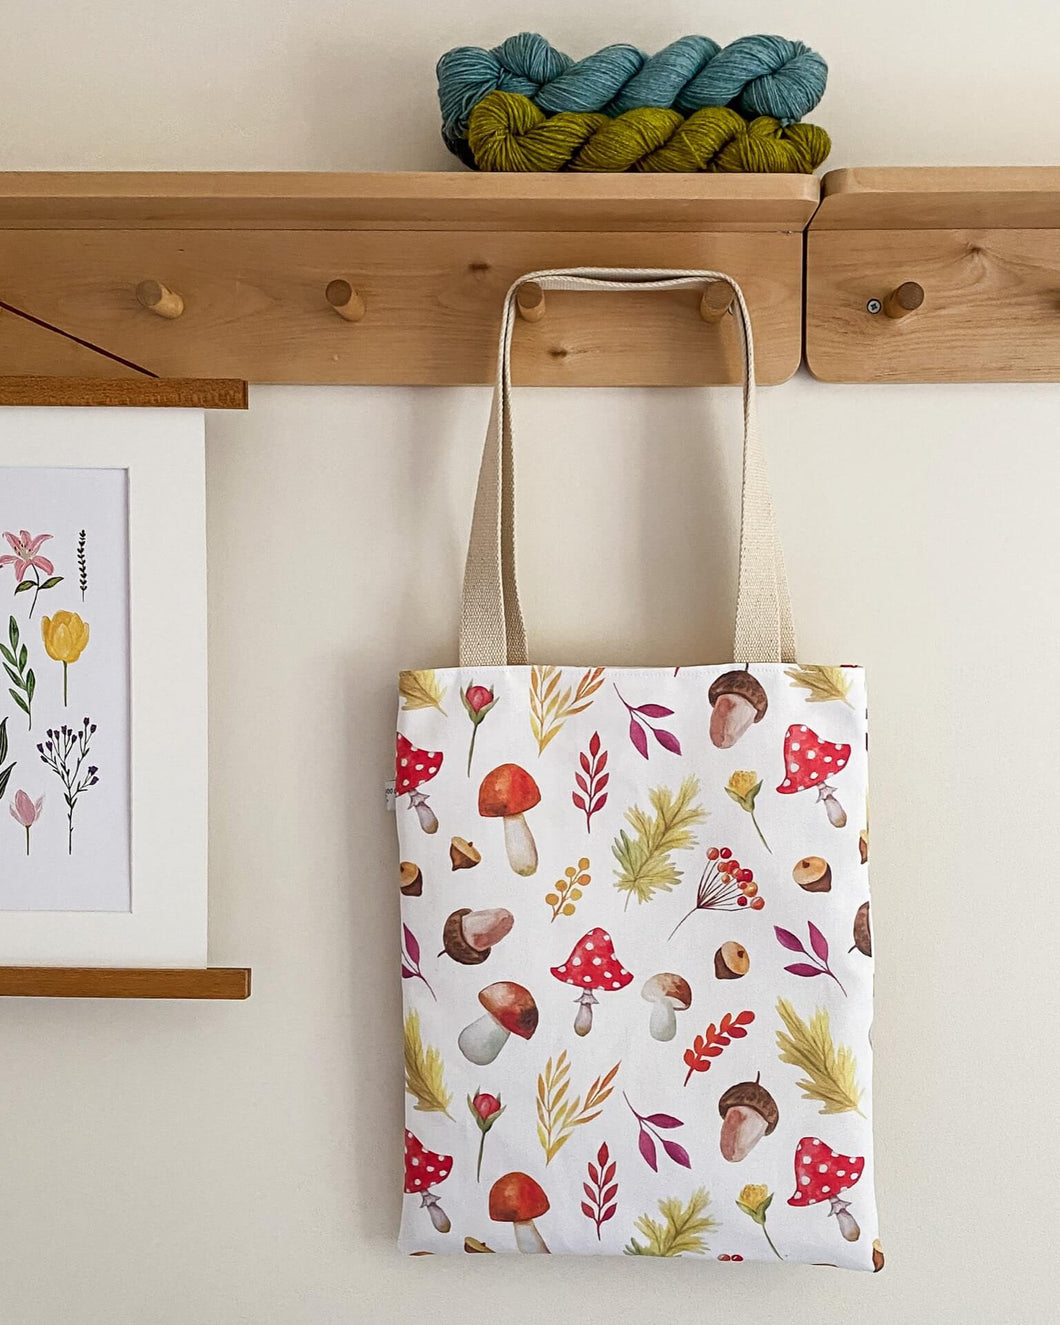 A tote bag hangs from a set of wooden hooks. The bag is covered in autumnal motifs such as toadstools and acorns. It has two long cream coloured handles. Above the bag on a shelf are some hanks of yarn and hanging next to the bag is a floral print.